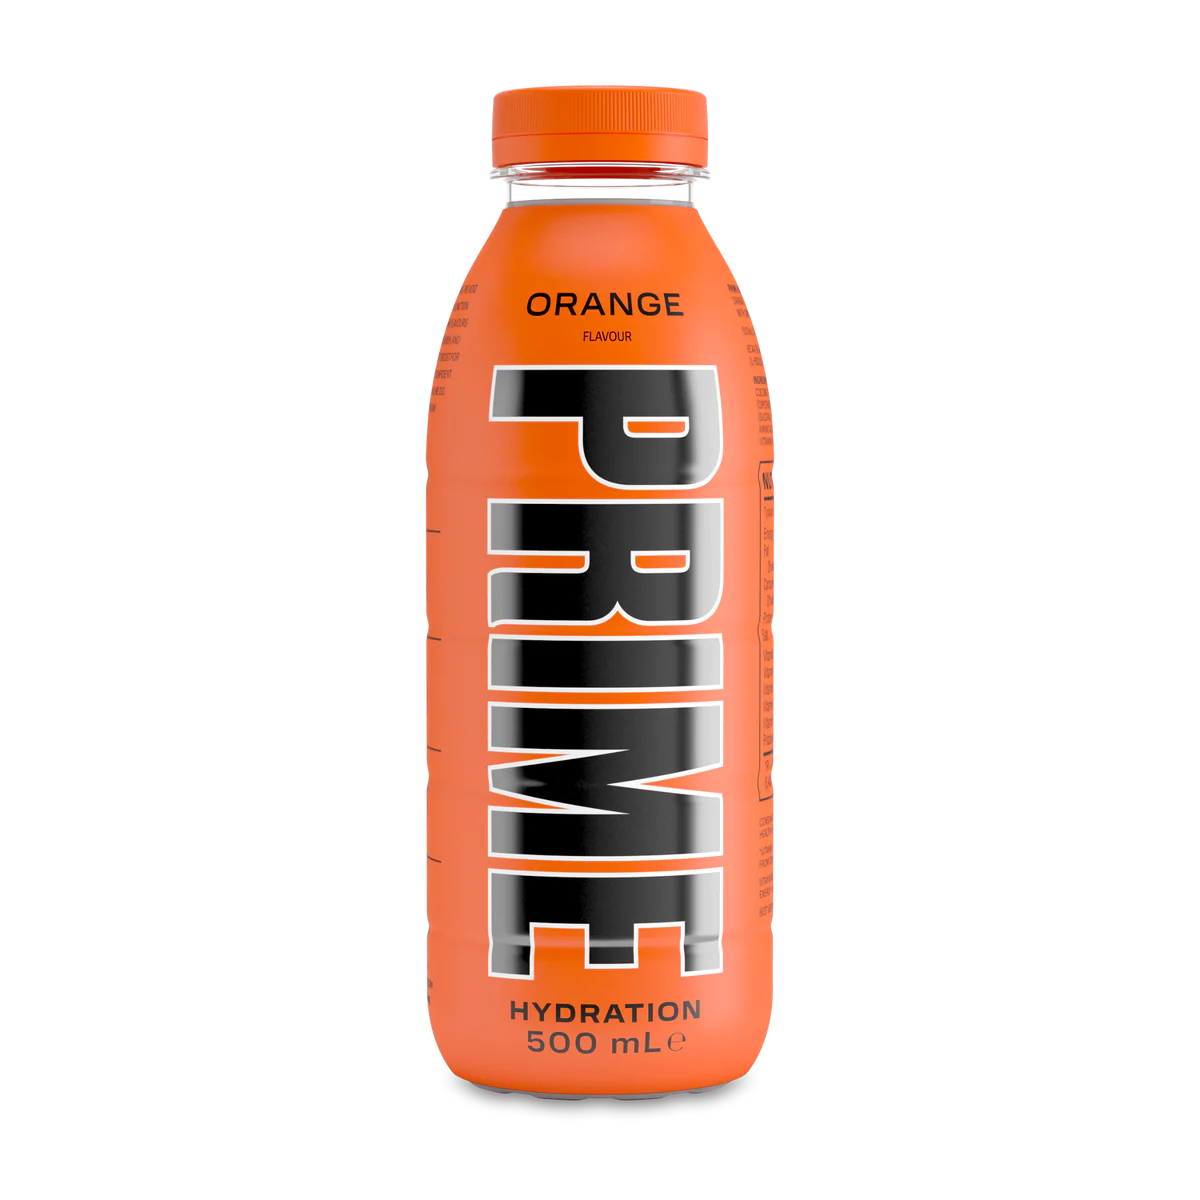 Prime Hydration - All Flavours! Trusted Seller - Rapid Postage!